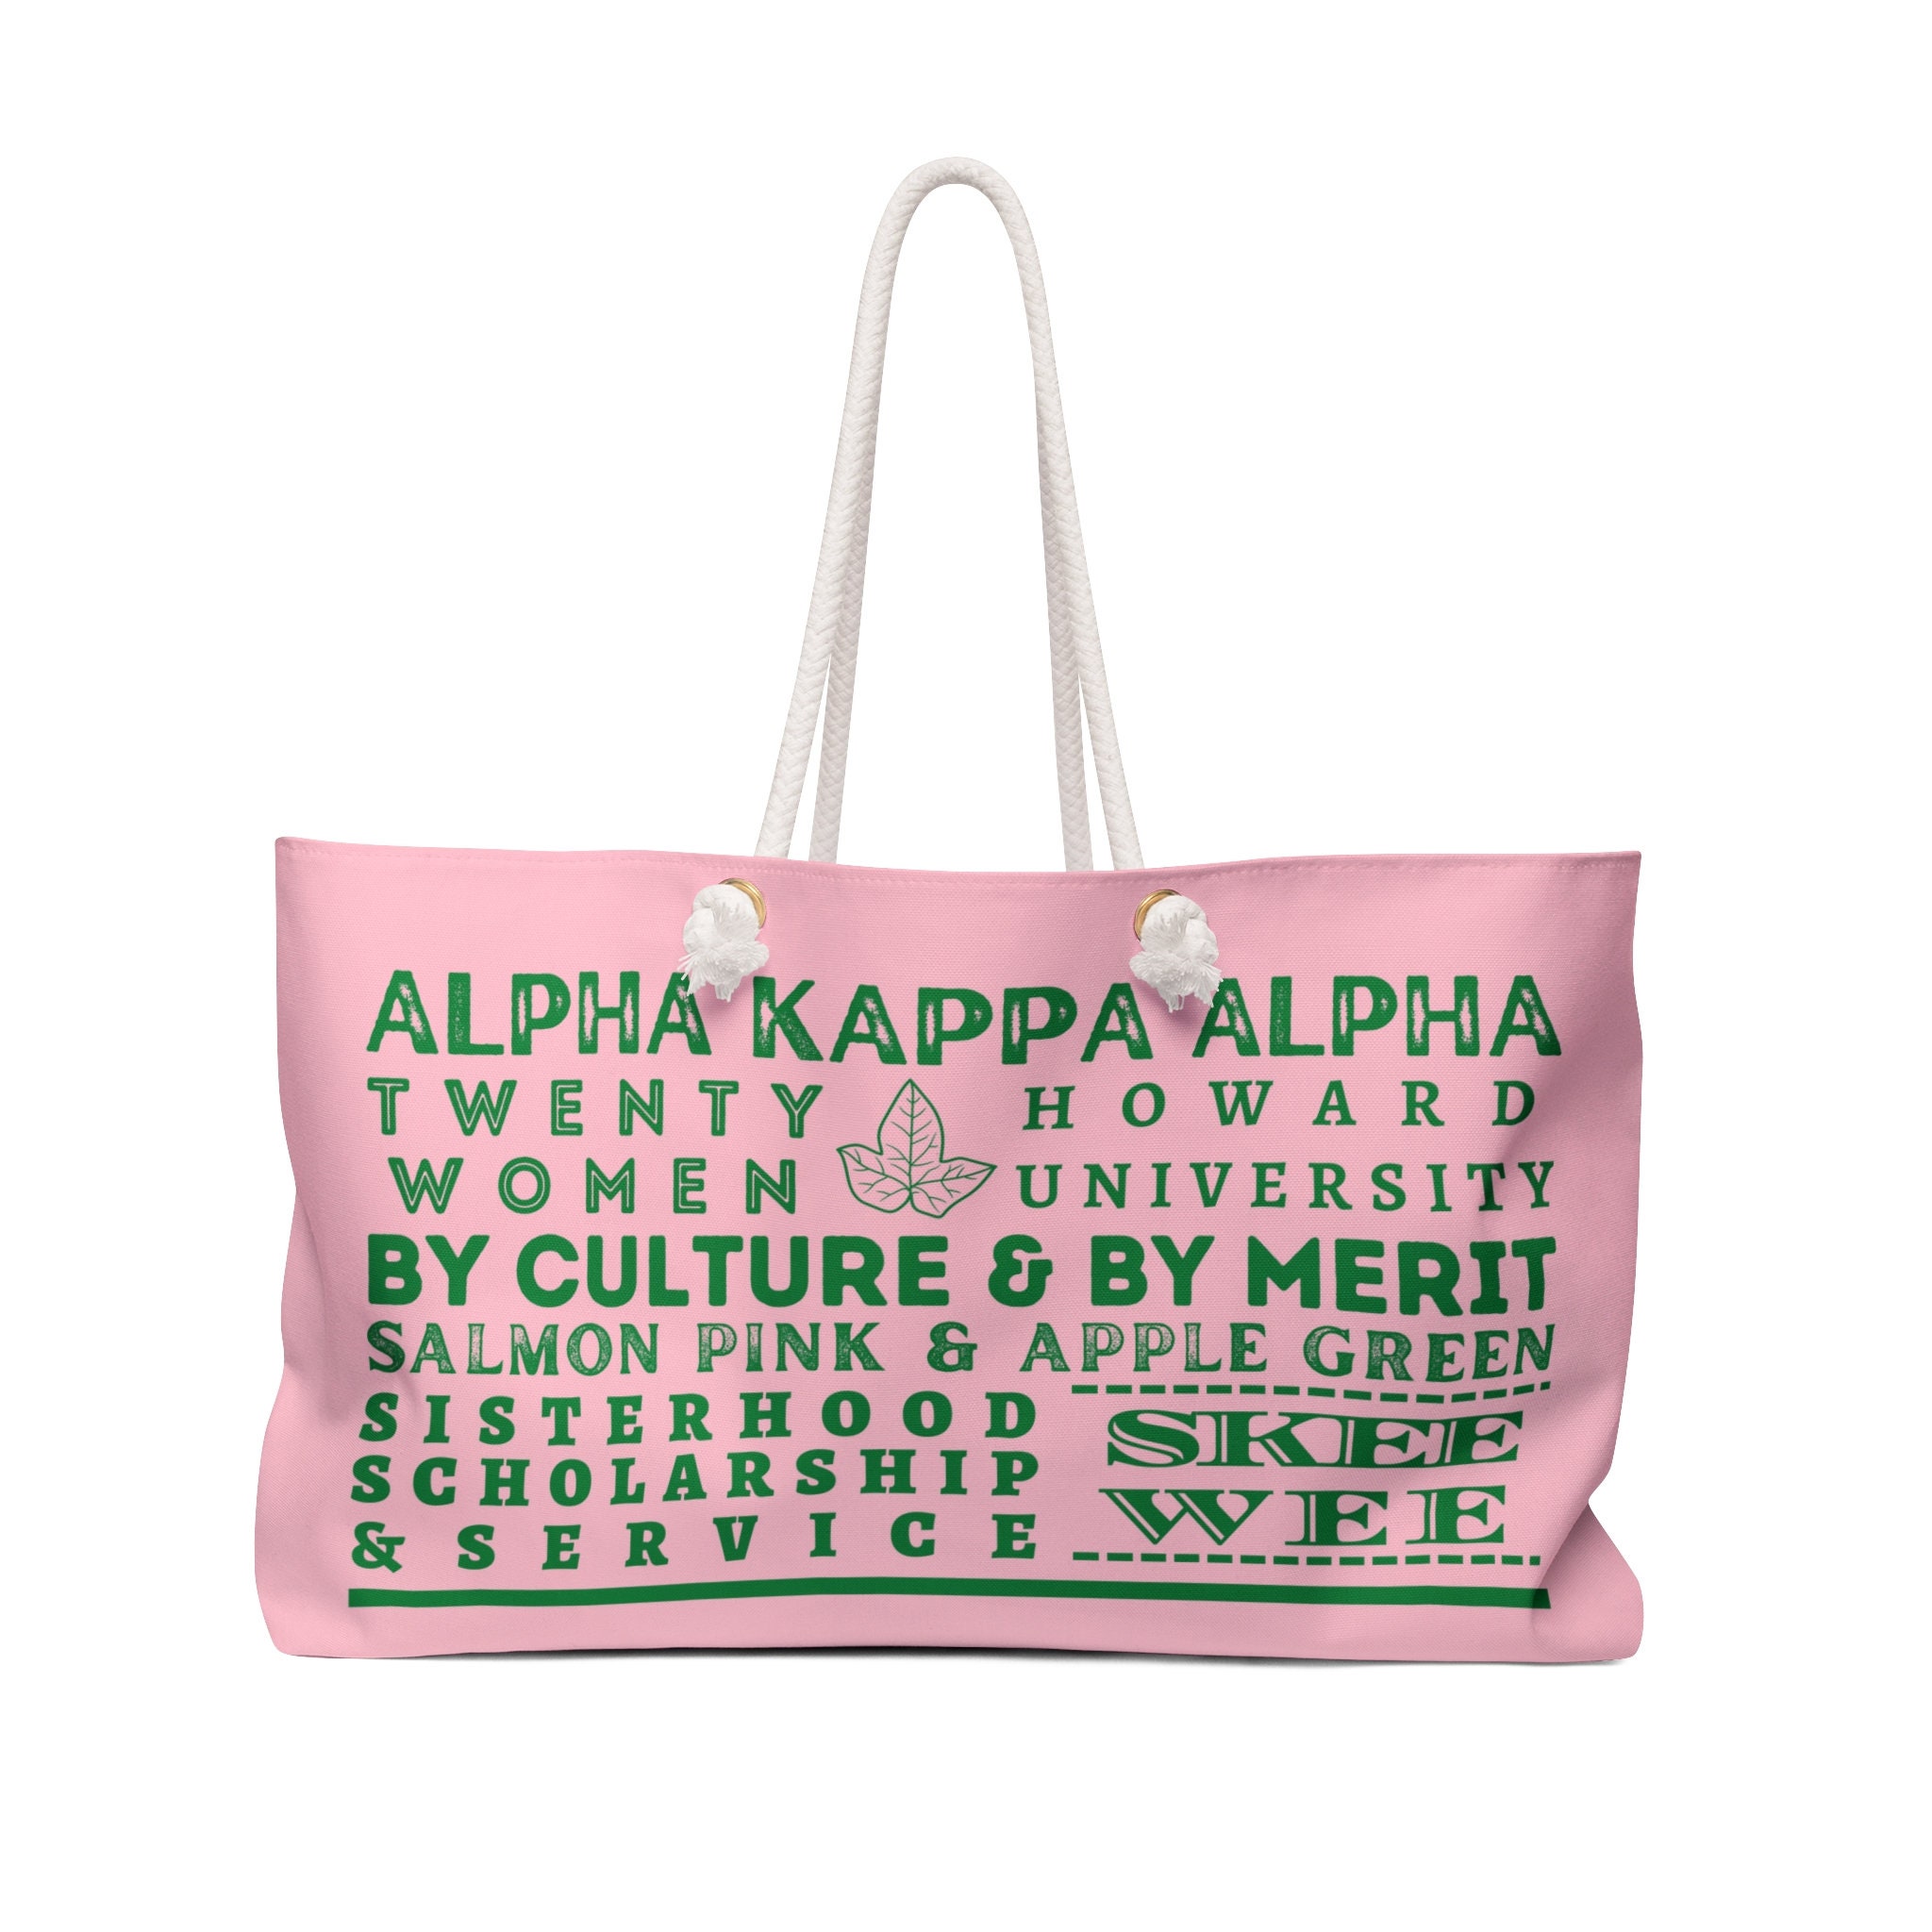 black woman Sorority Tote Bag Aesthetic Vintage Designer Handbags for Women  Shopping Bags with Travel Grocery Shopping